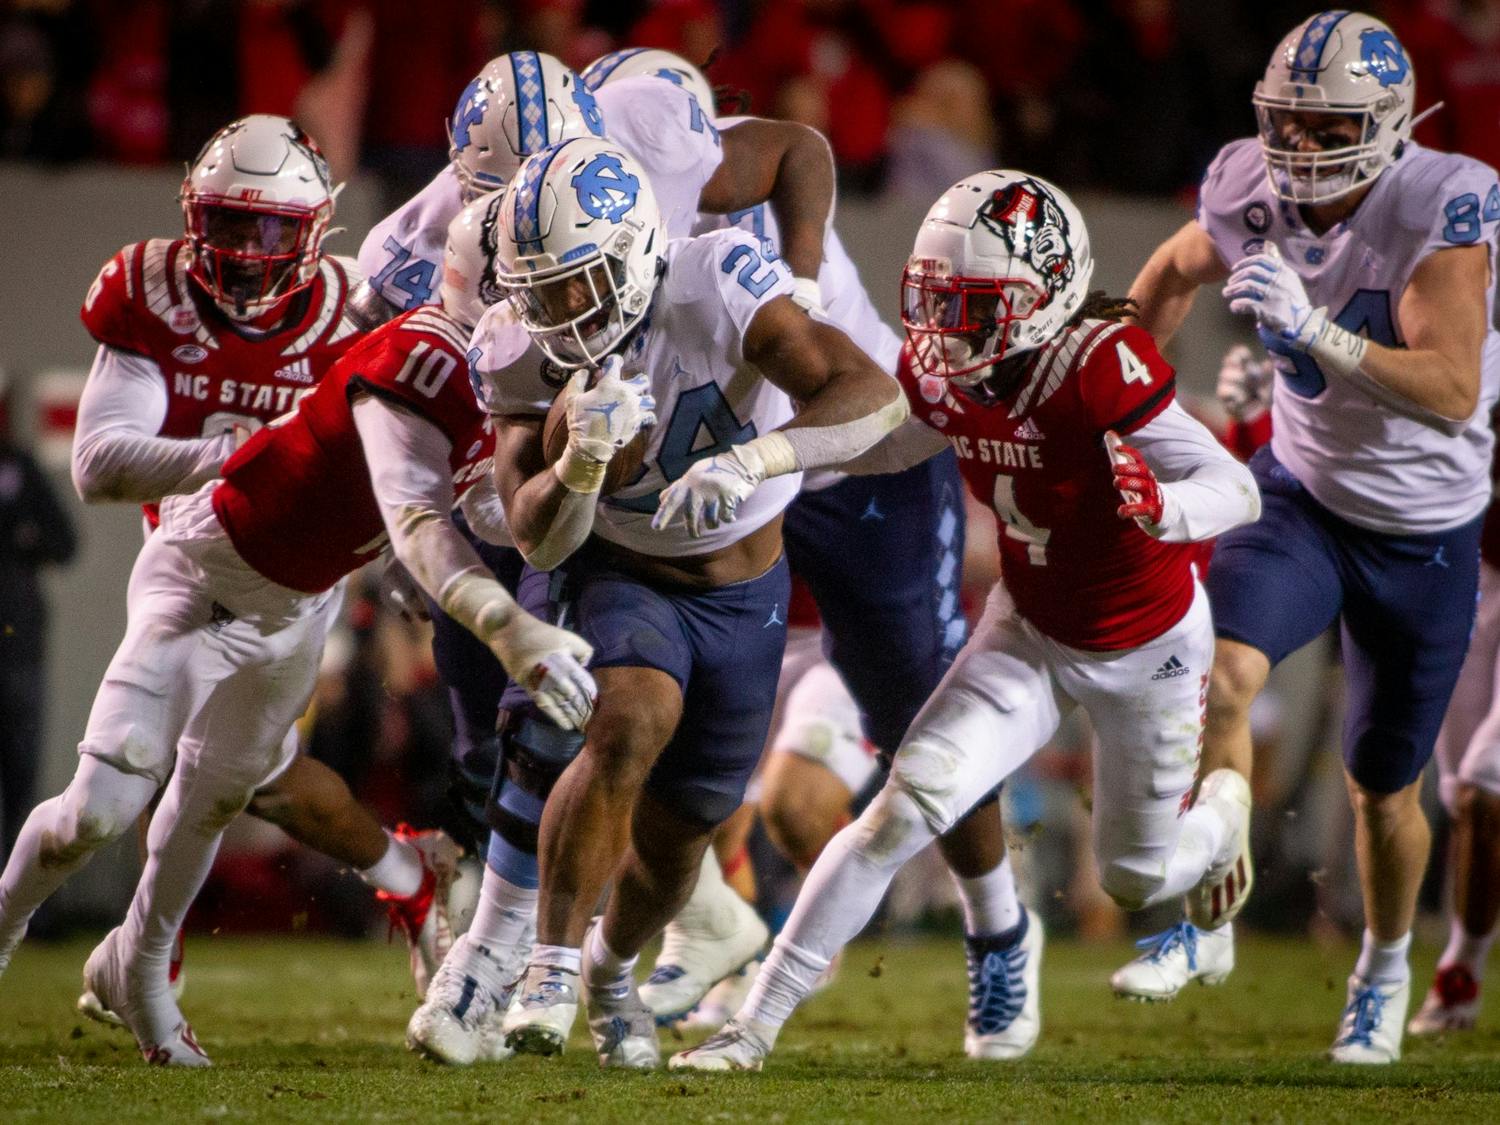 North Carolina football lost Friday night in Raleigh to N.C. State, 34-30.&nbsp;